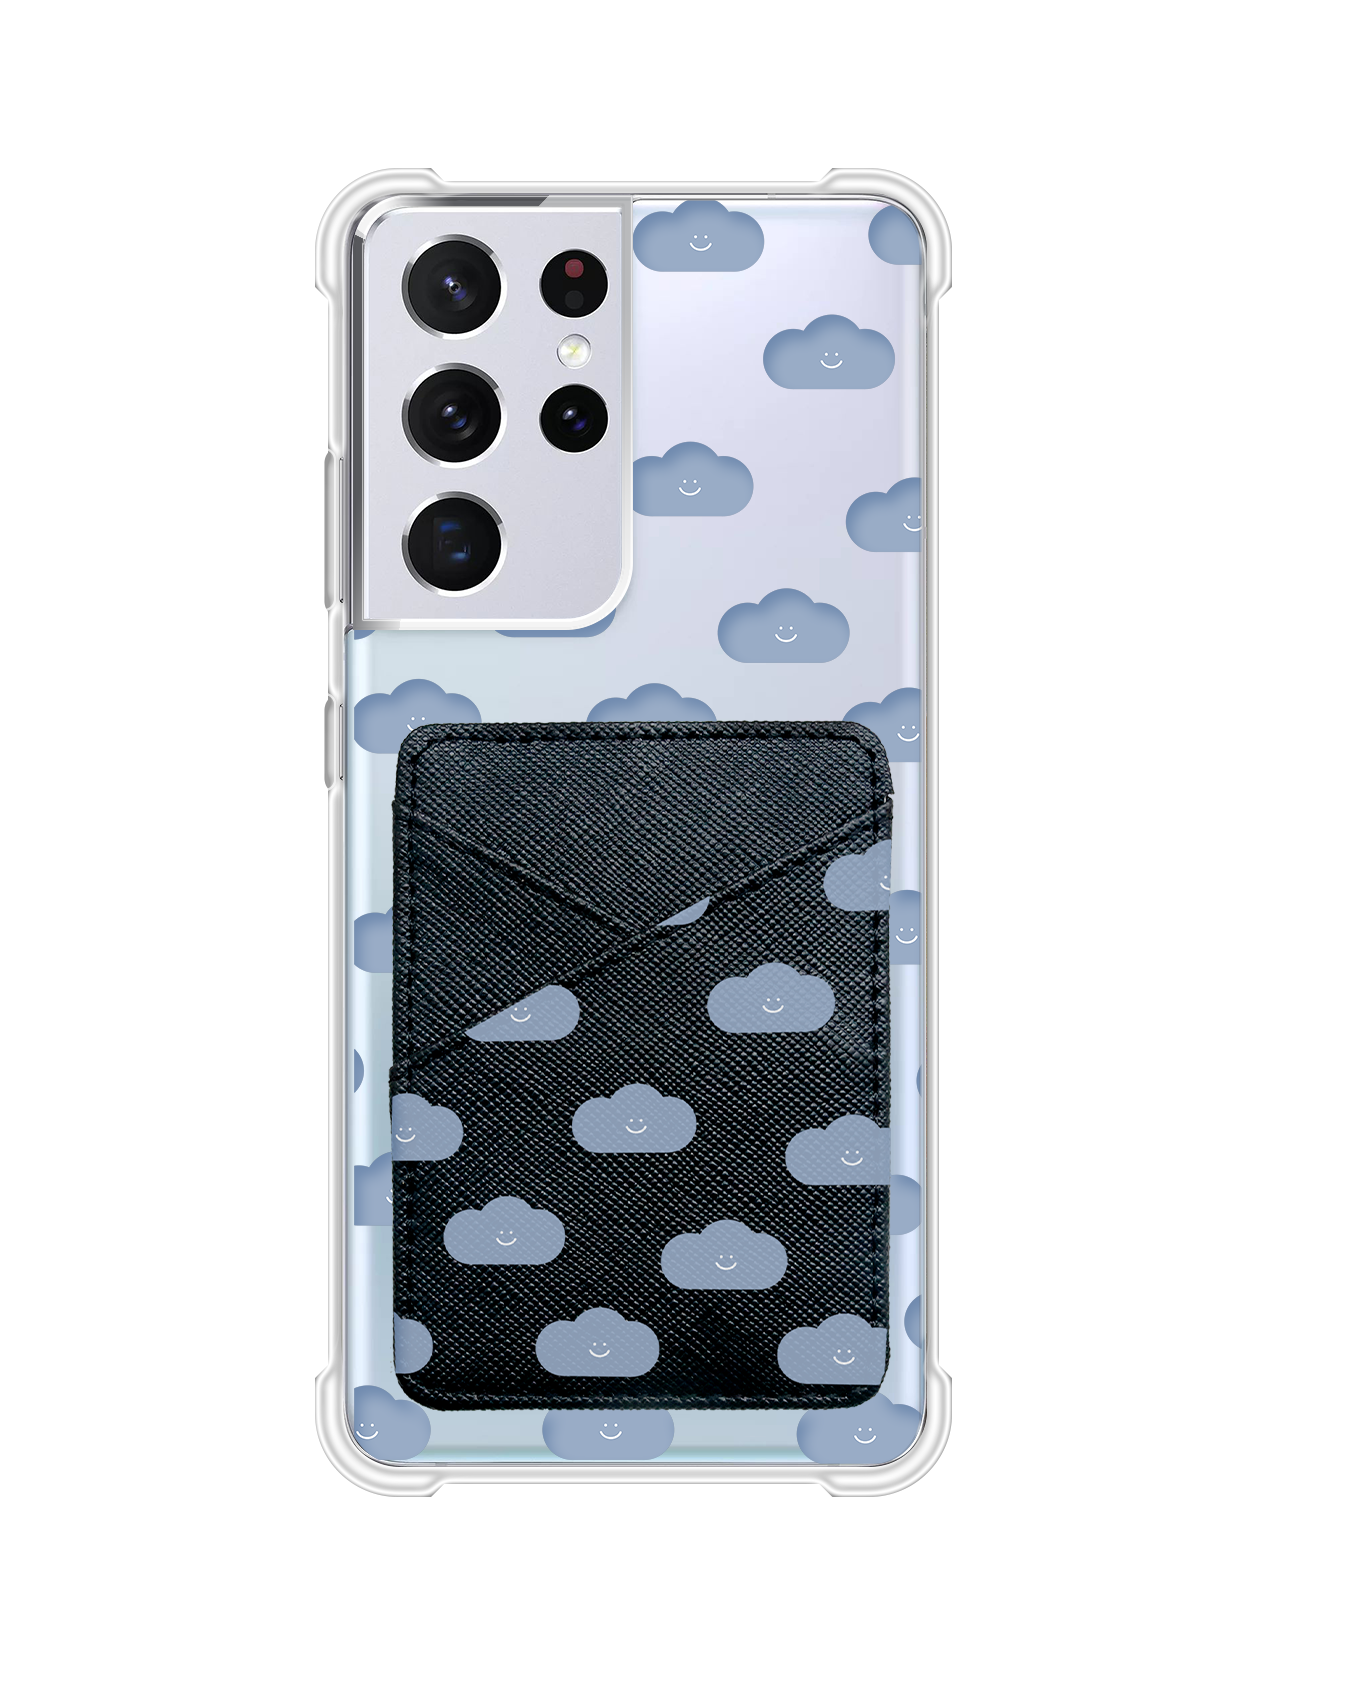 Android Phone Wallet Case - Dark Clouds